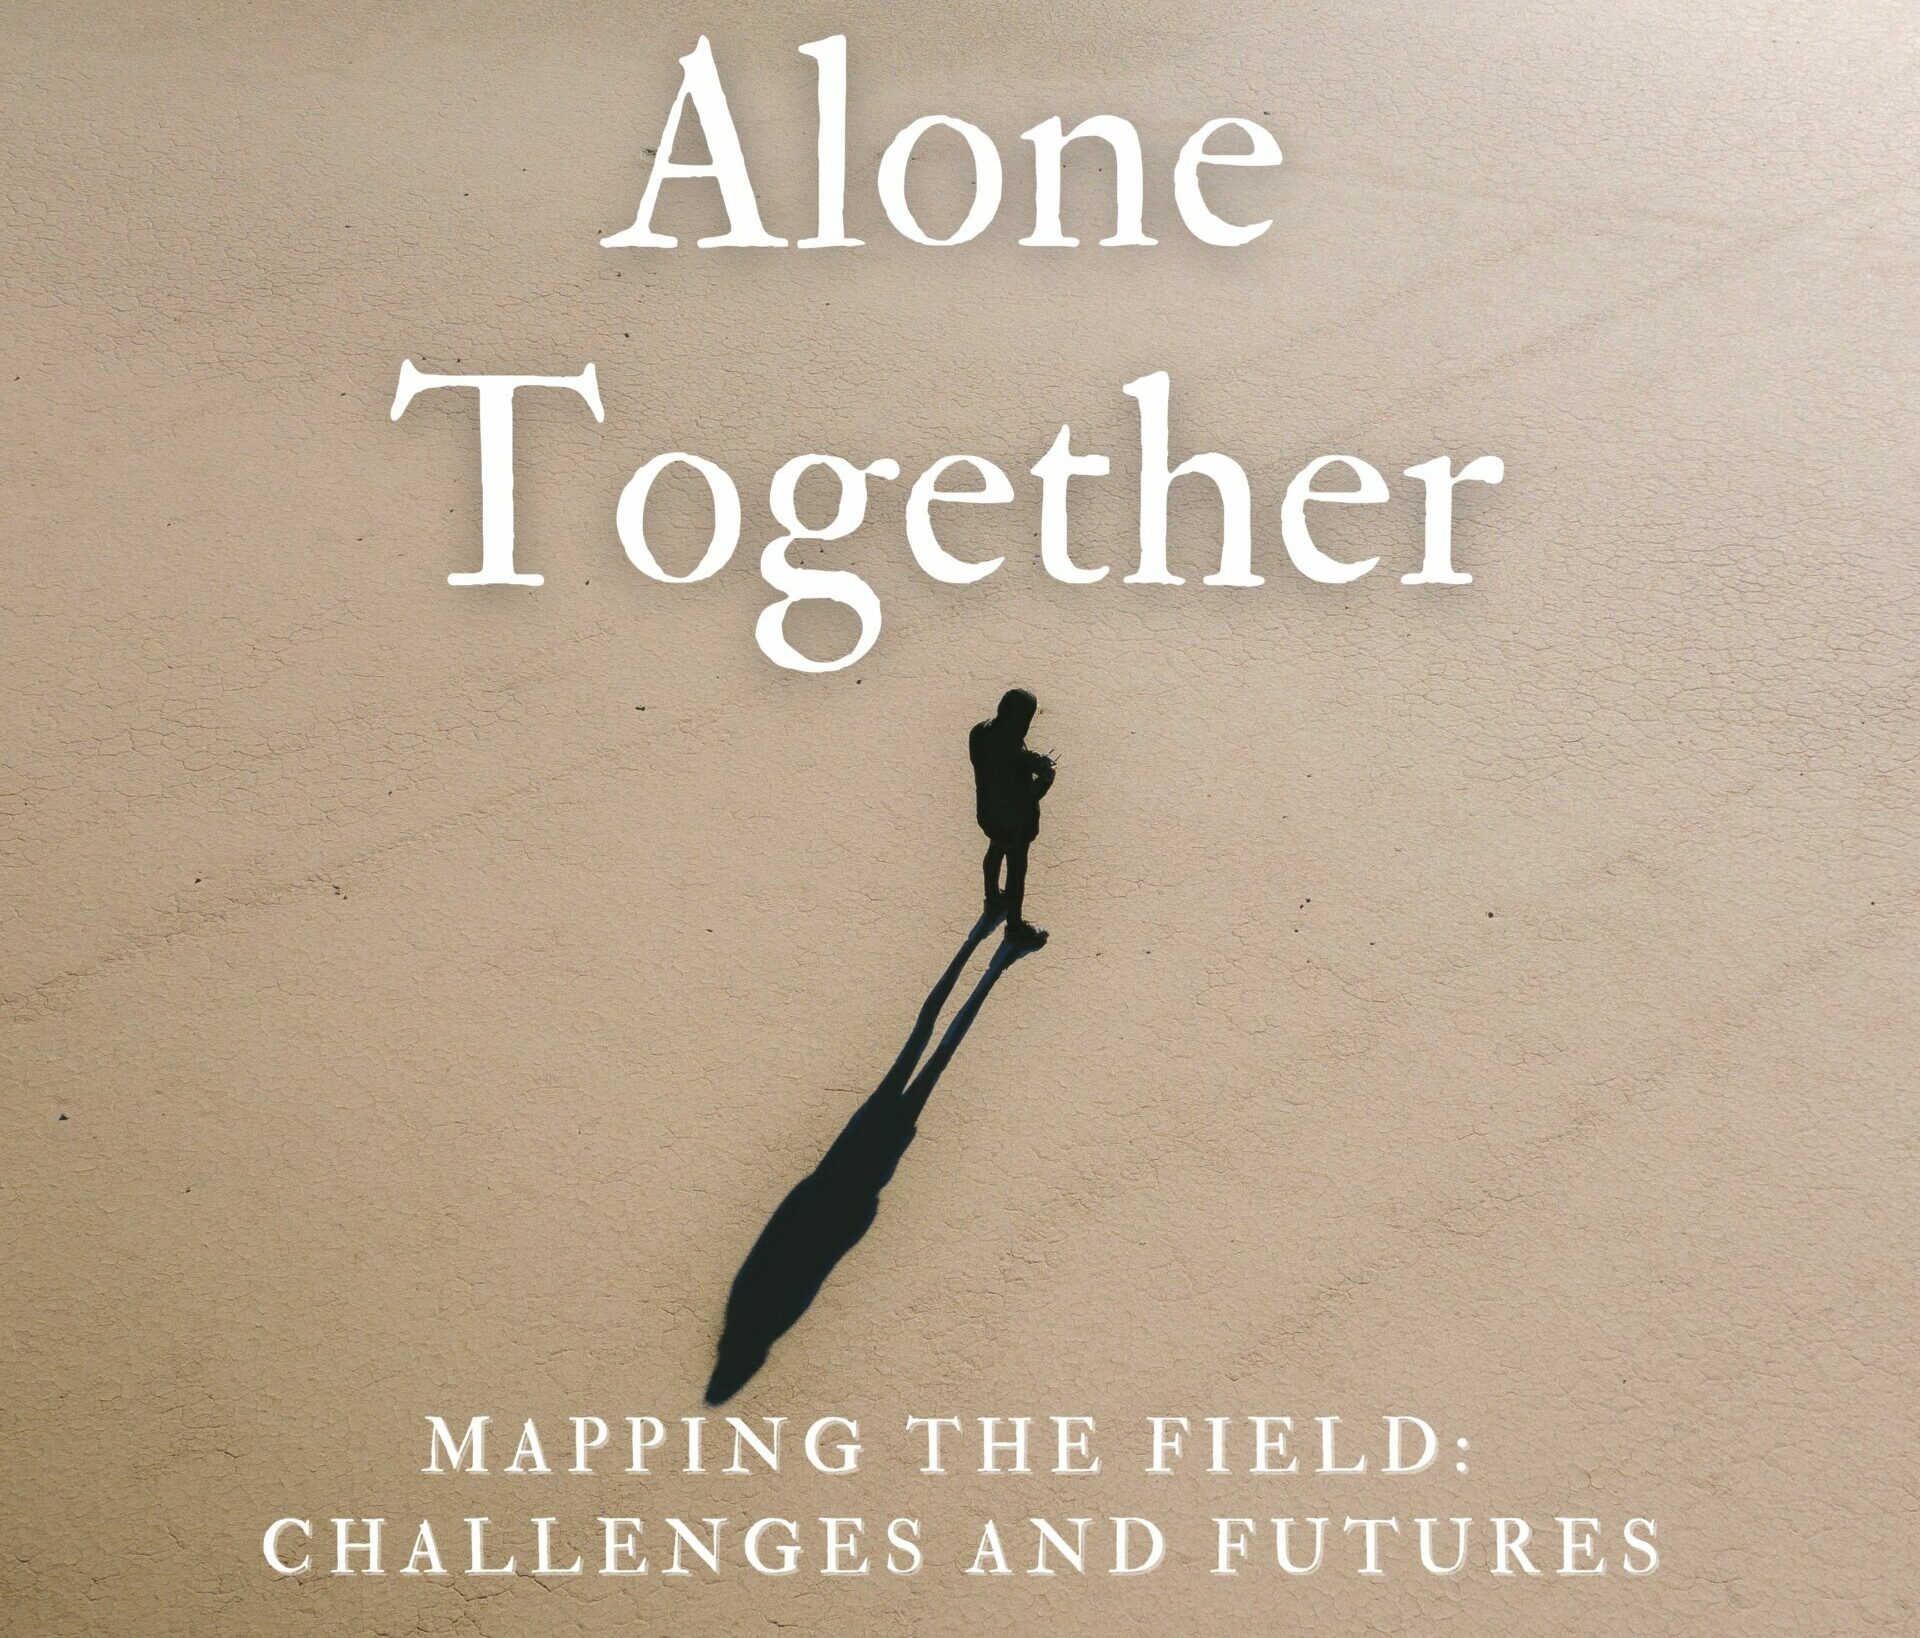 Alone Together. A Pandisciplinary Conference on Solitude in Community.